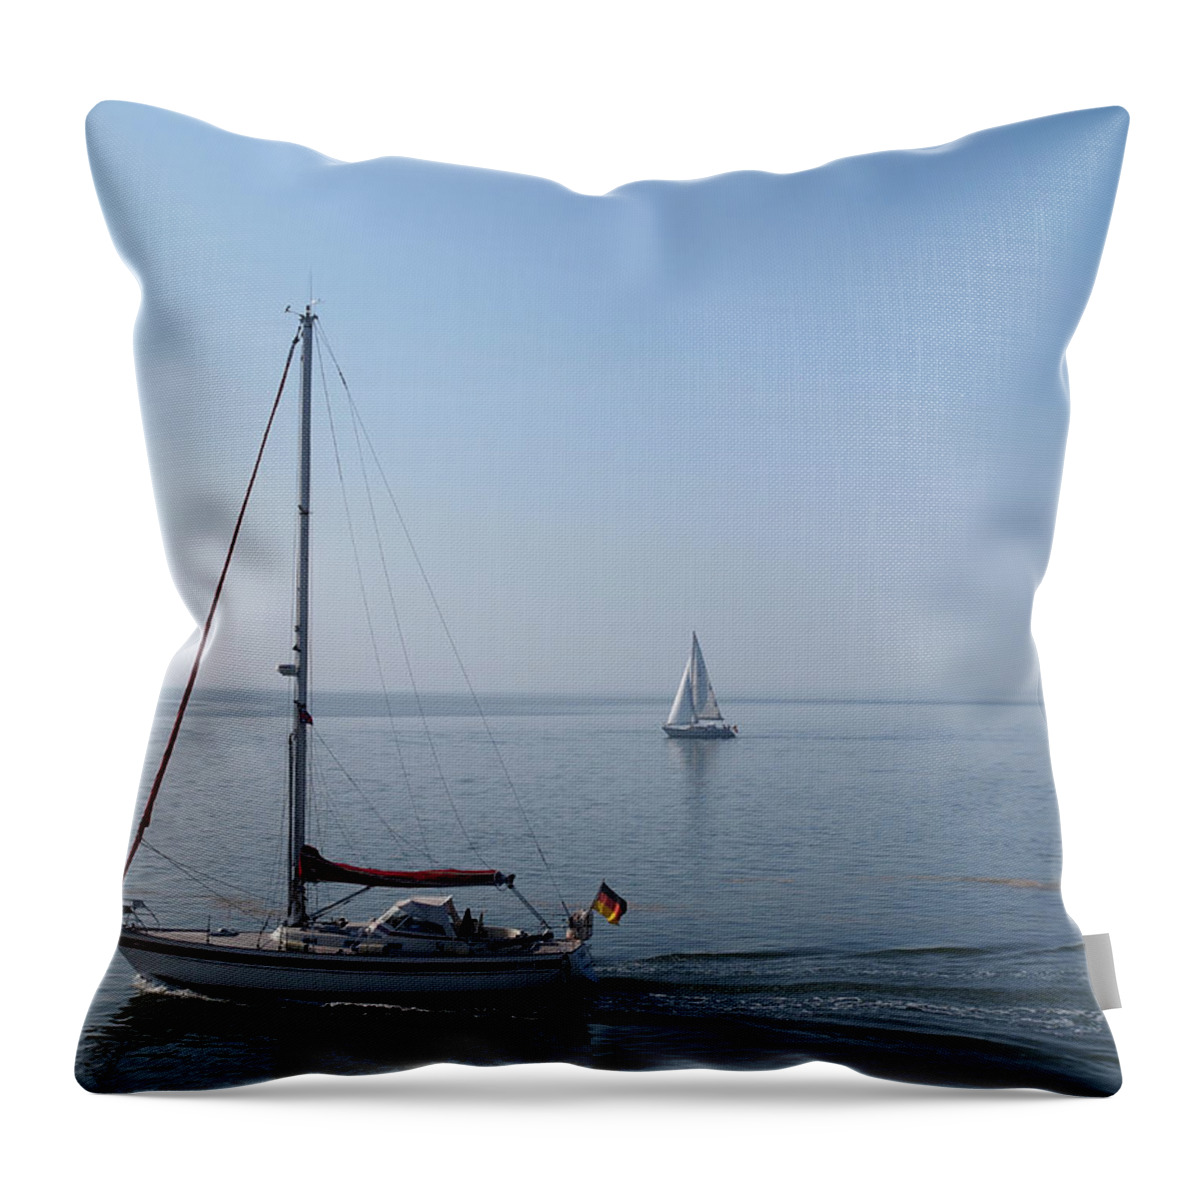 Ip_10311626 Throw Pillow featuring the photograph Sailboat In Sea At Spiekeroog, Lower Saxony, Germany #1 by Jalag / Marion Beckhuser